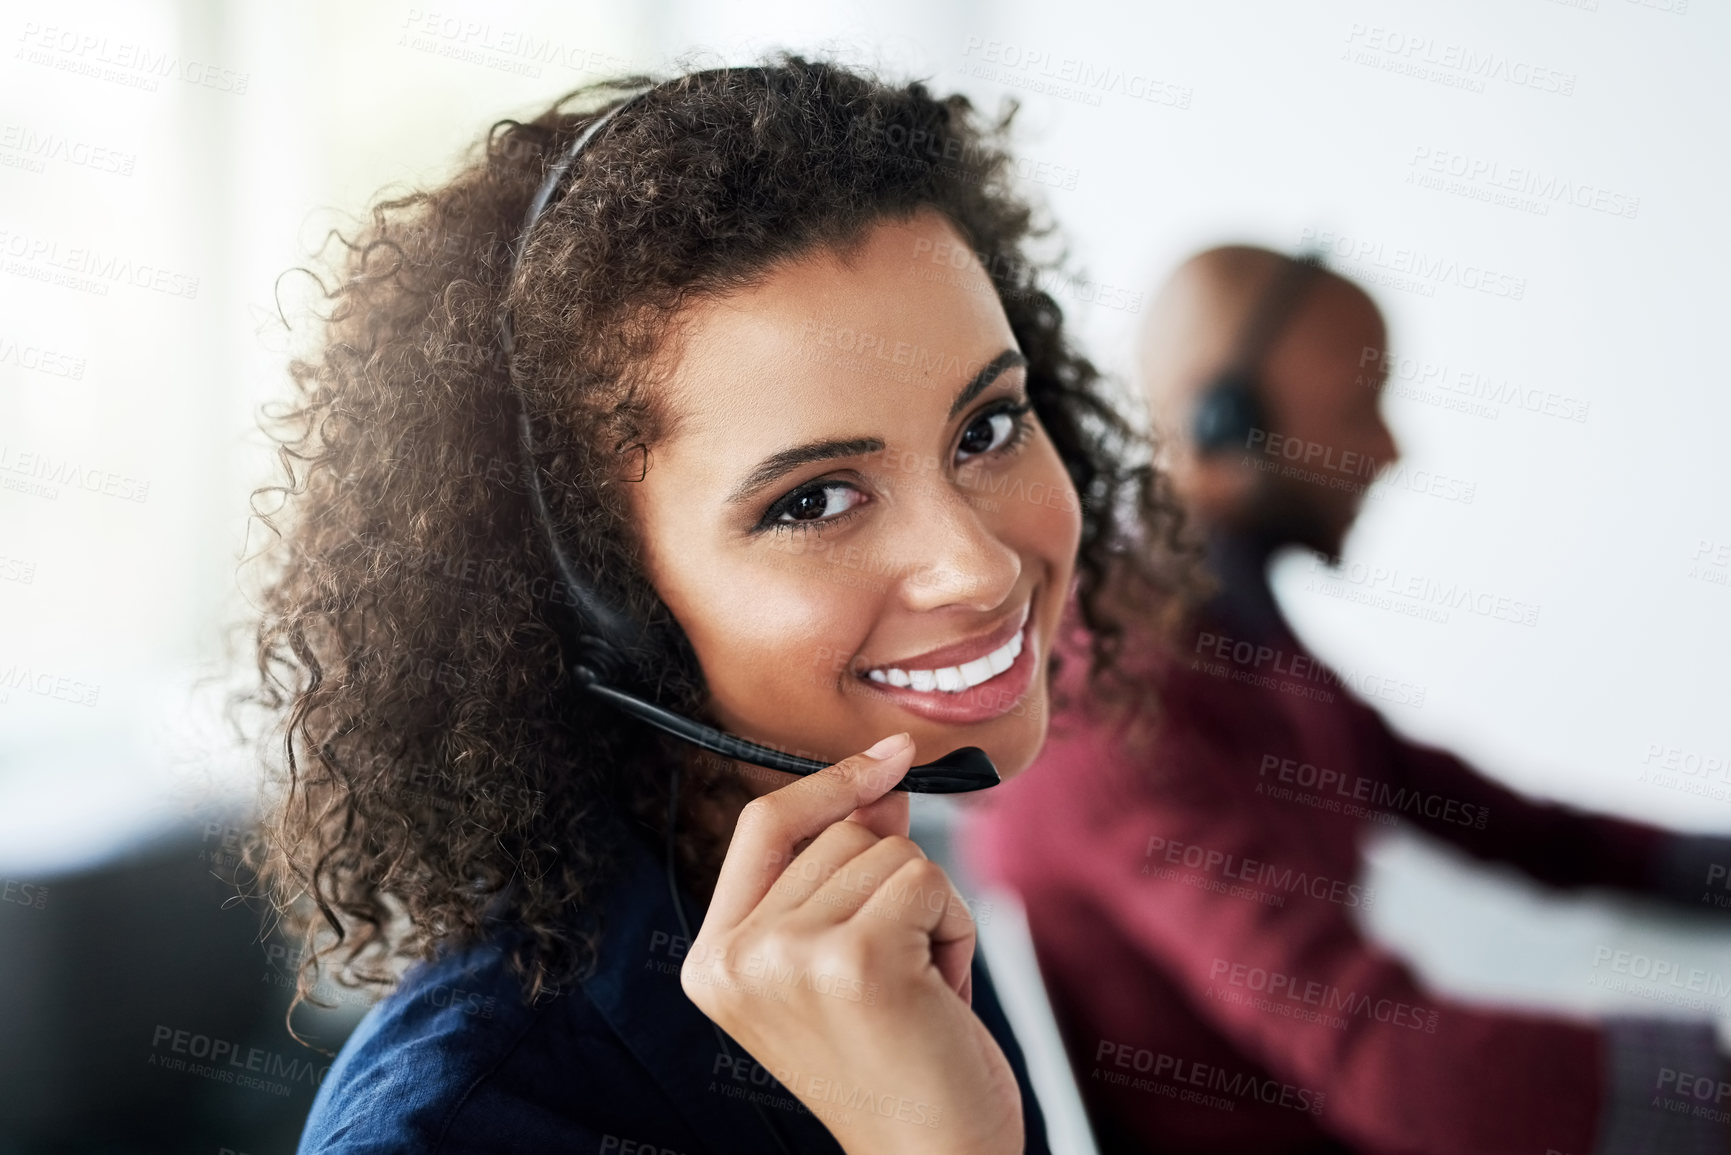 Buy stock photo Cropped portrait of an attractive young female call center agent working in her office